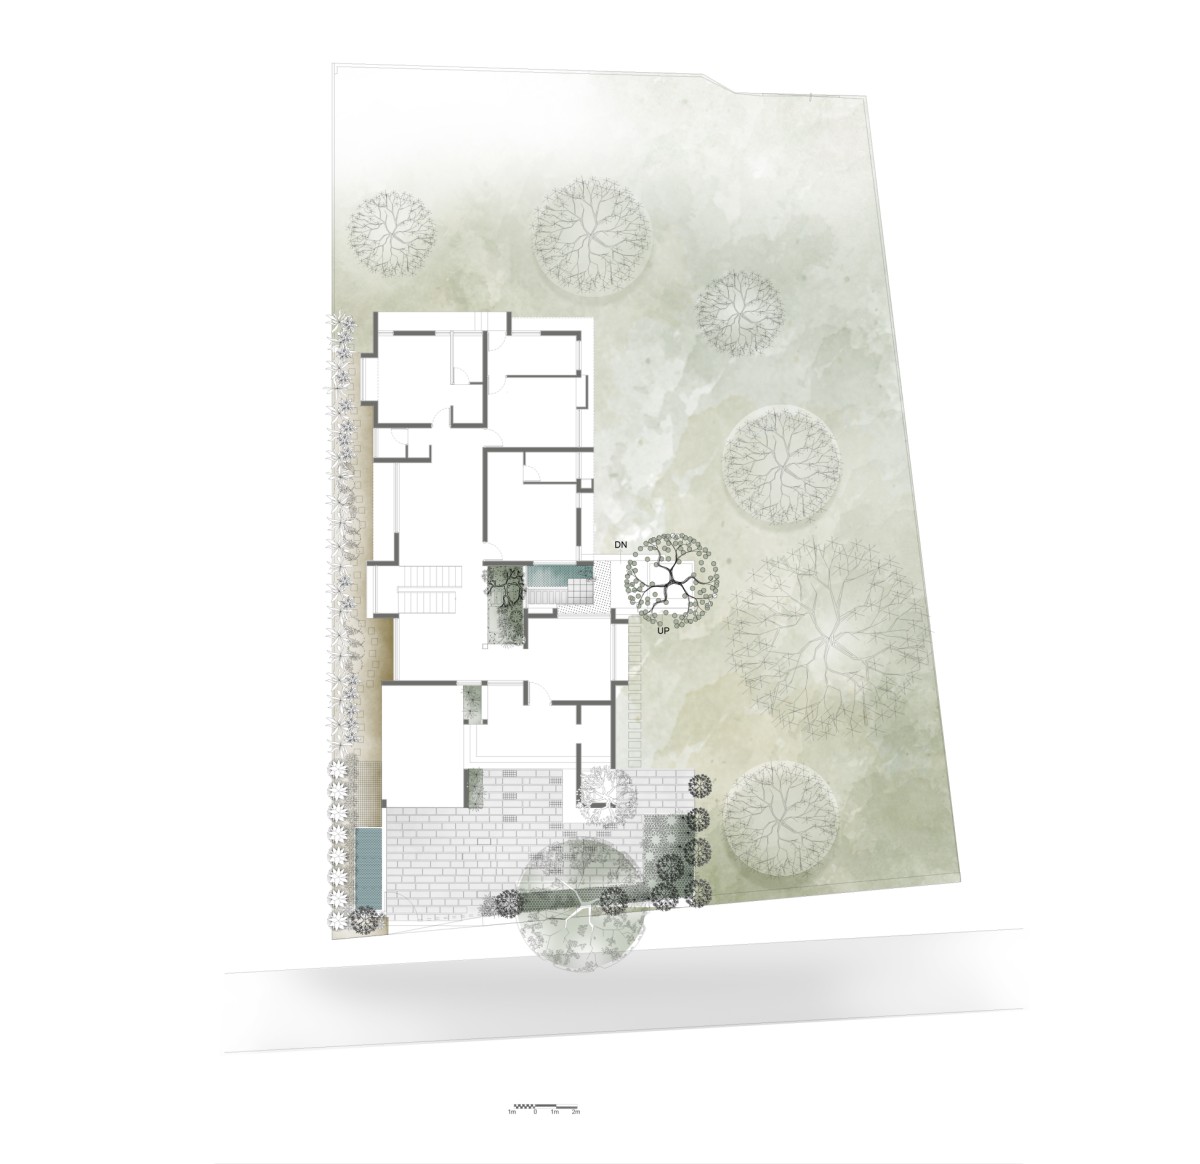 Site plan of Manjadi House of The Bead Tree by NO Architects Designers and Social Artists